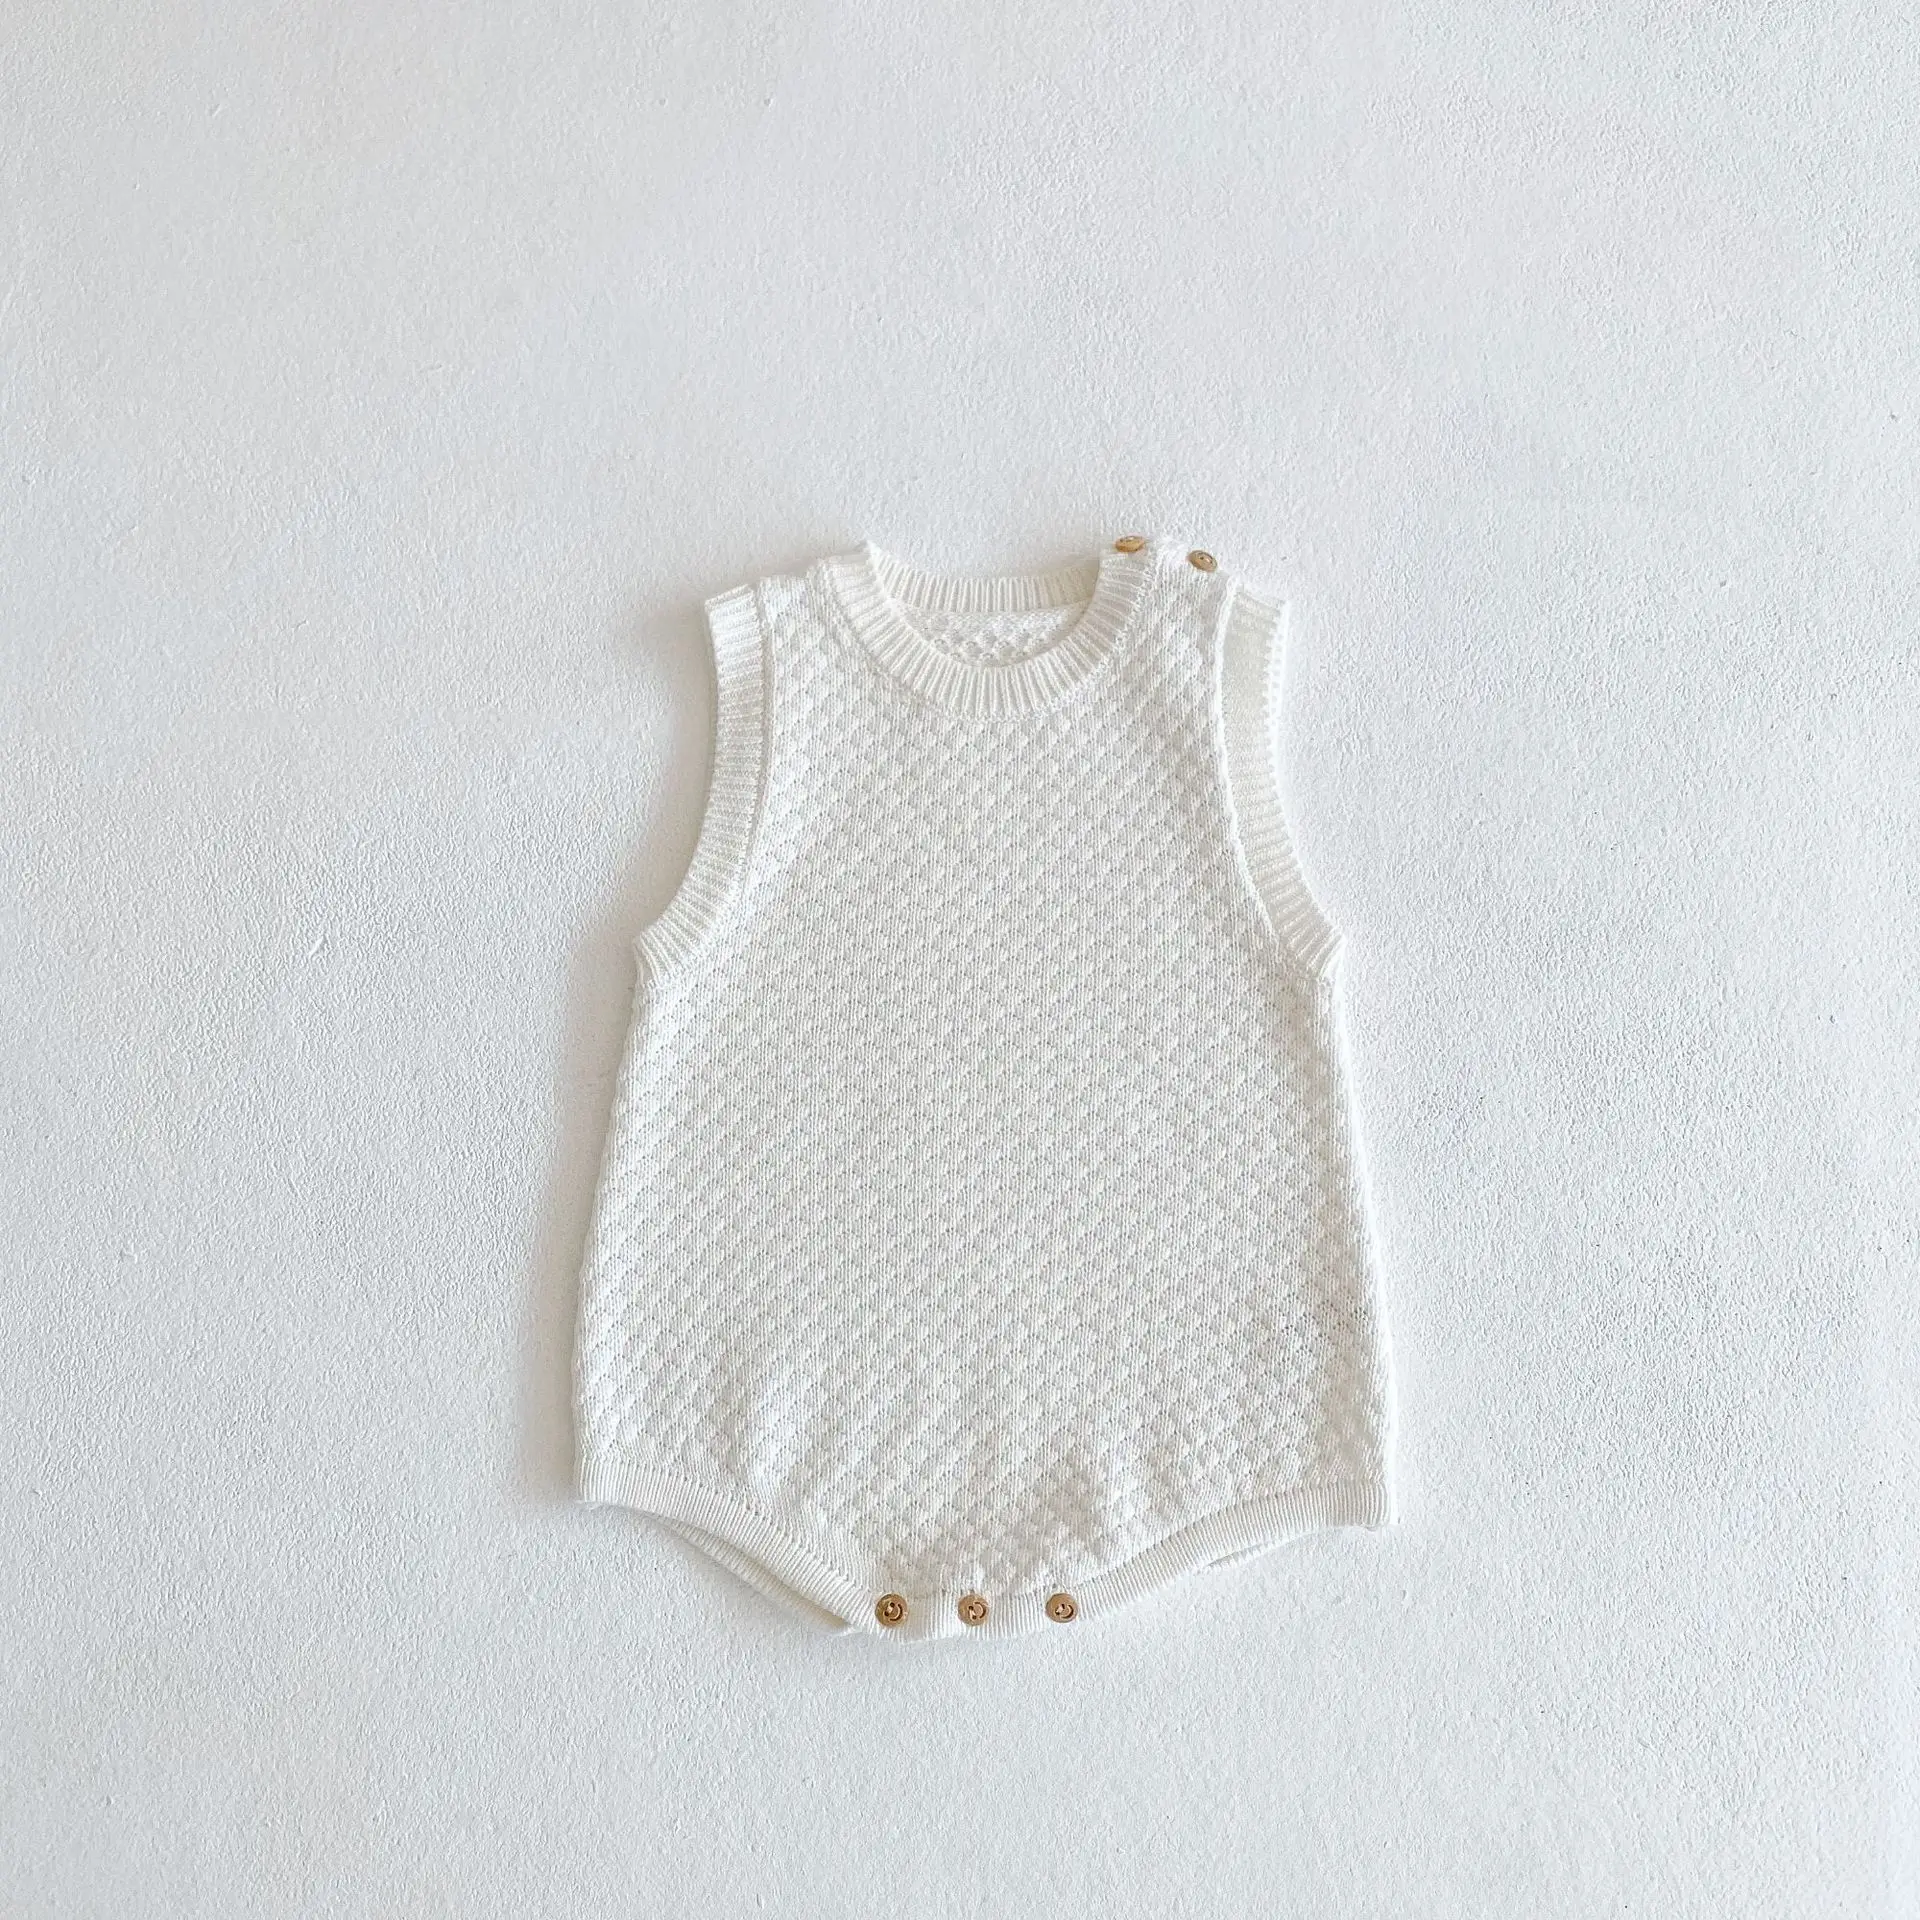 baby bodysuit dress 2022 spring clothing infant baby sweater round neck solid color cotton yarn knitted romper Coat two-piece suit girl clothes cute baby bodysuits Baby Rompers